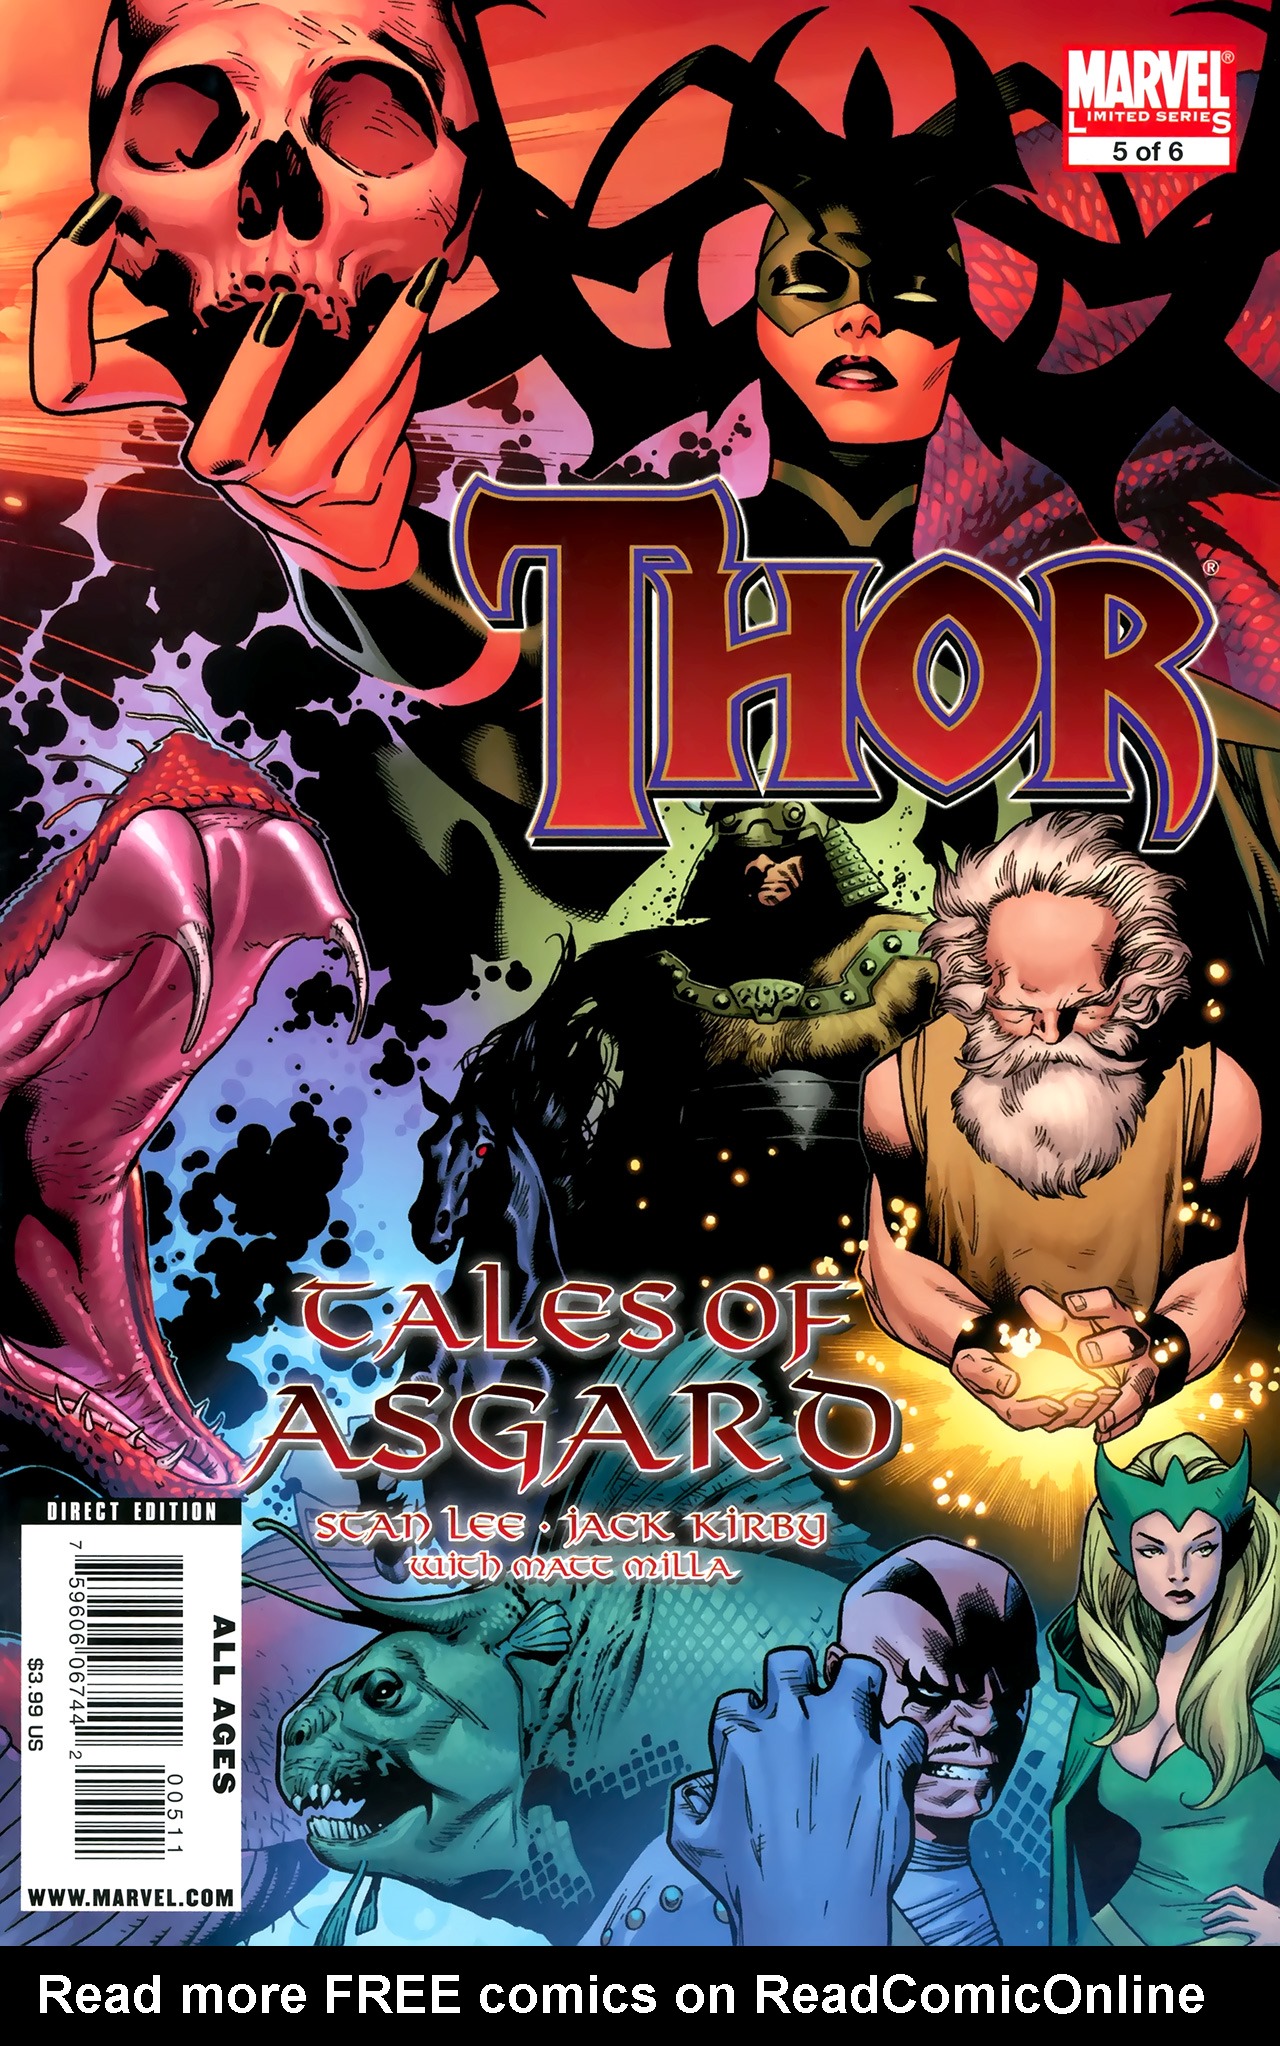 Read online Thor: Tales of Asgard by Stan Lee & Jack Kirby comic -  Issue #5 - 1